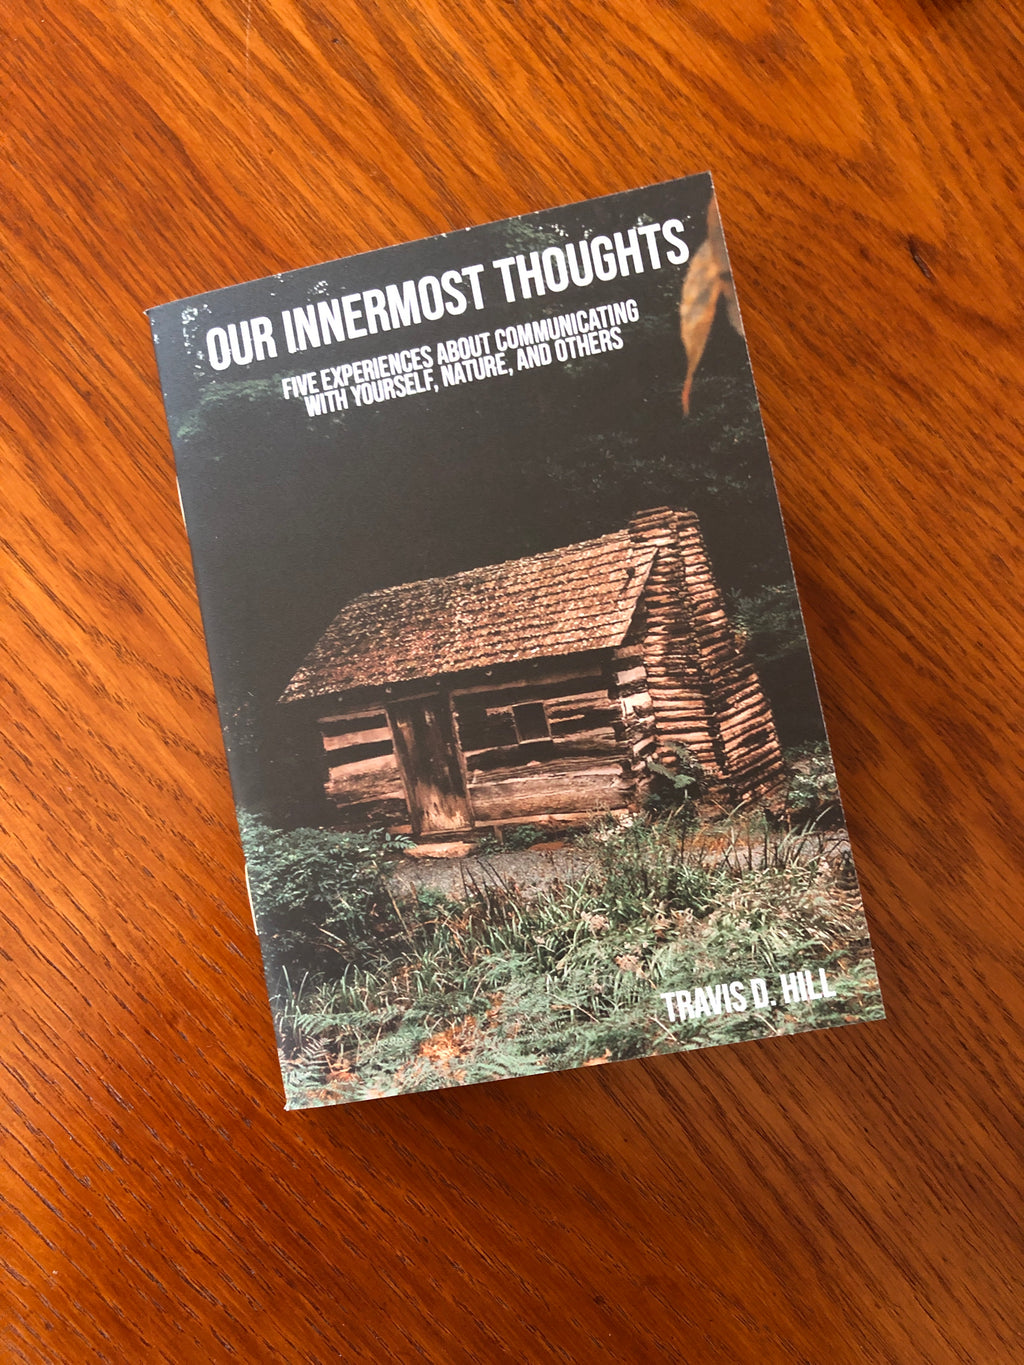 our innermost thoughts a role playing game zine by Travis Hill. 